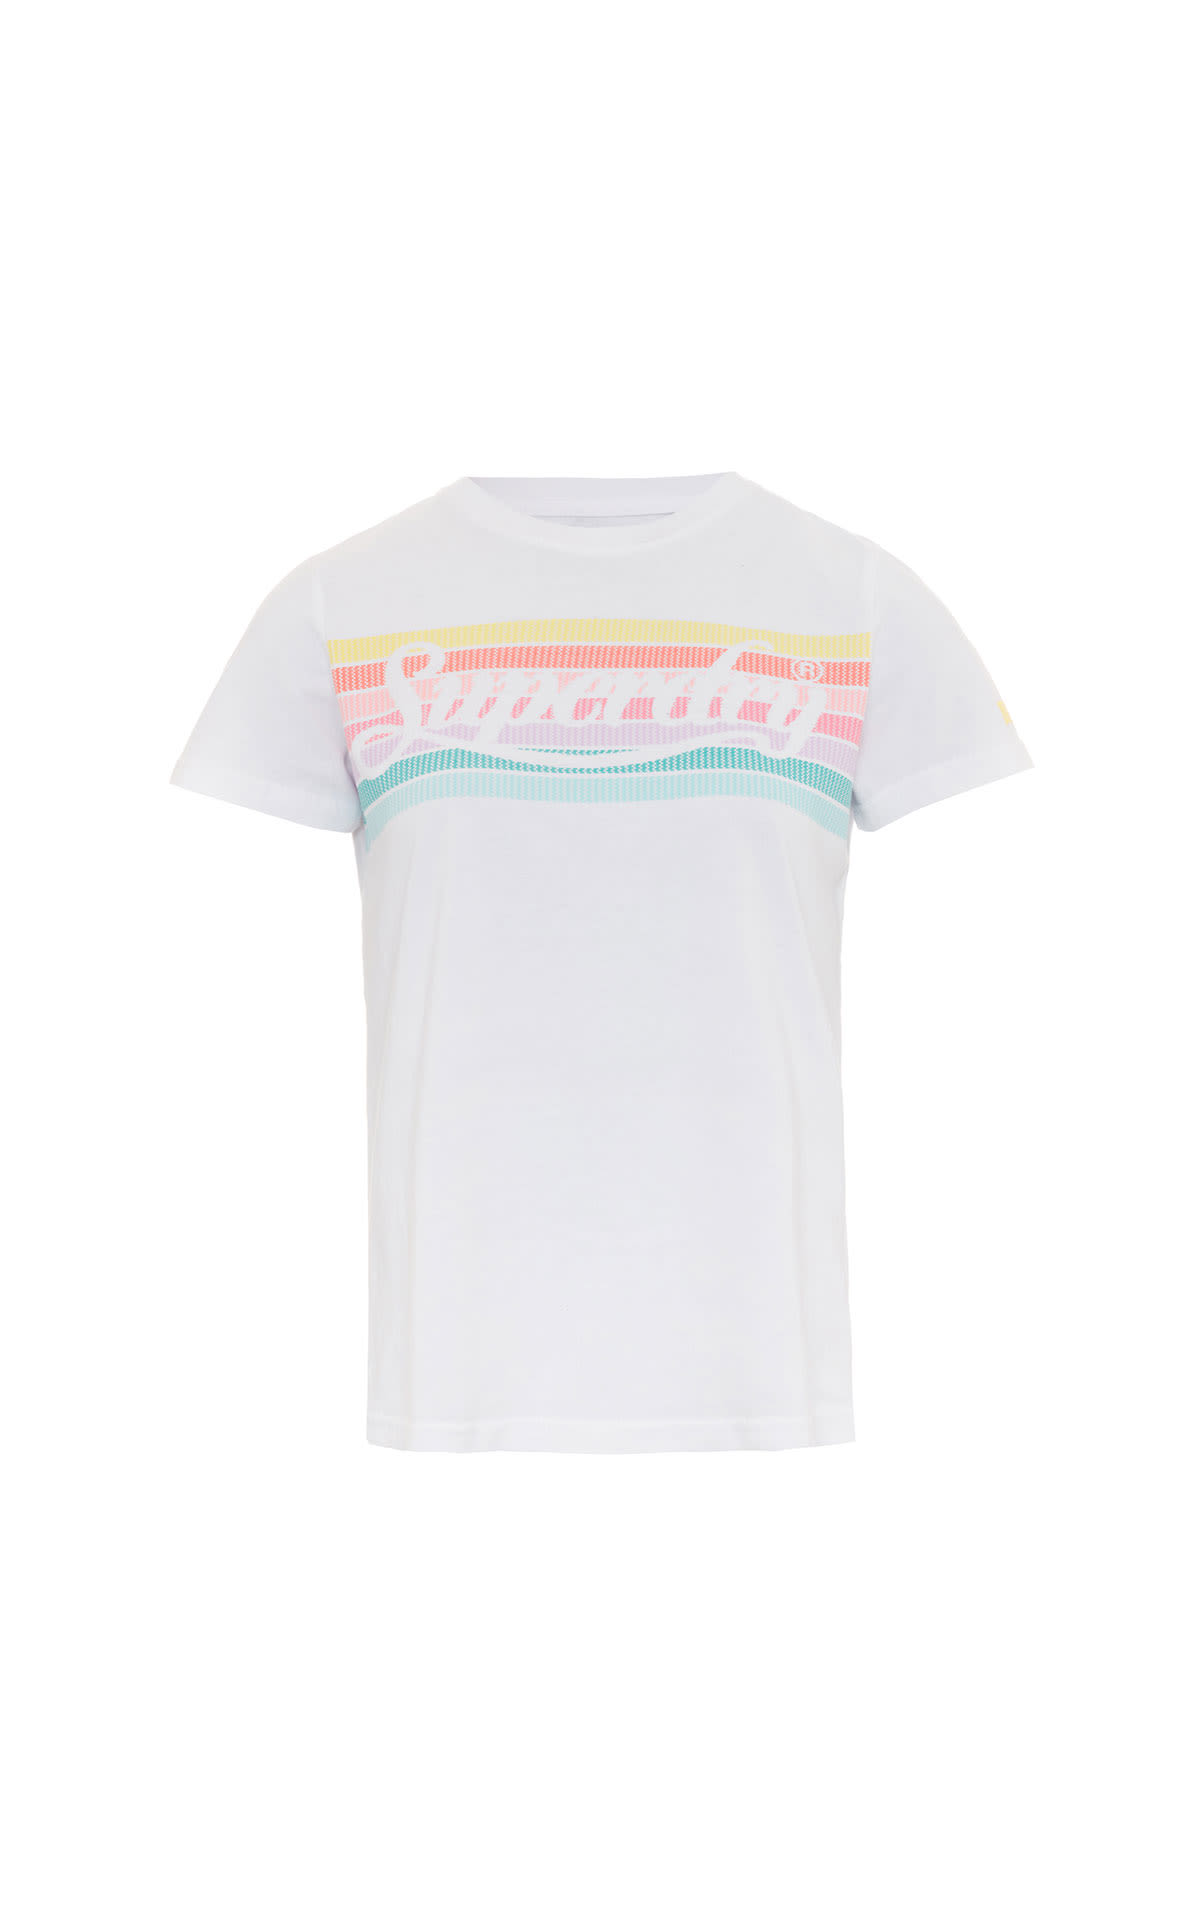 Superdry Logo tee from Bicester Village